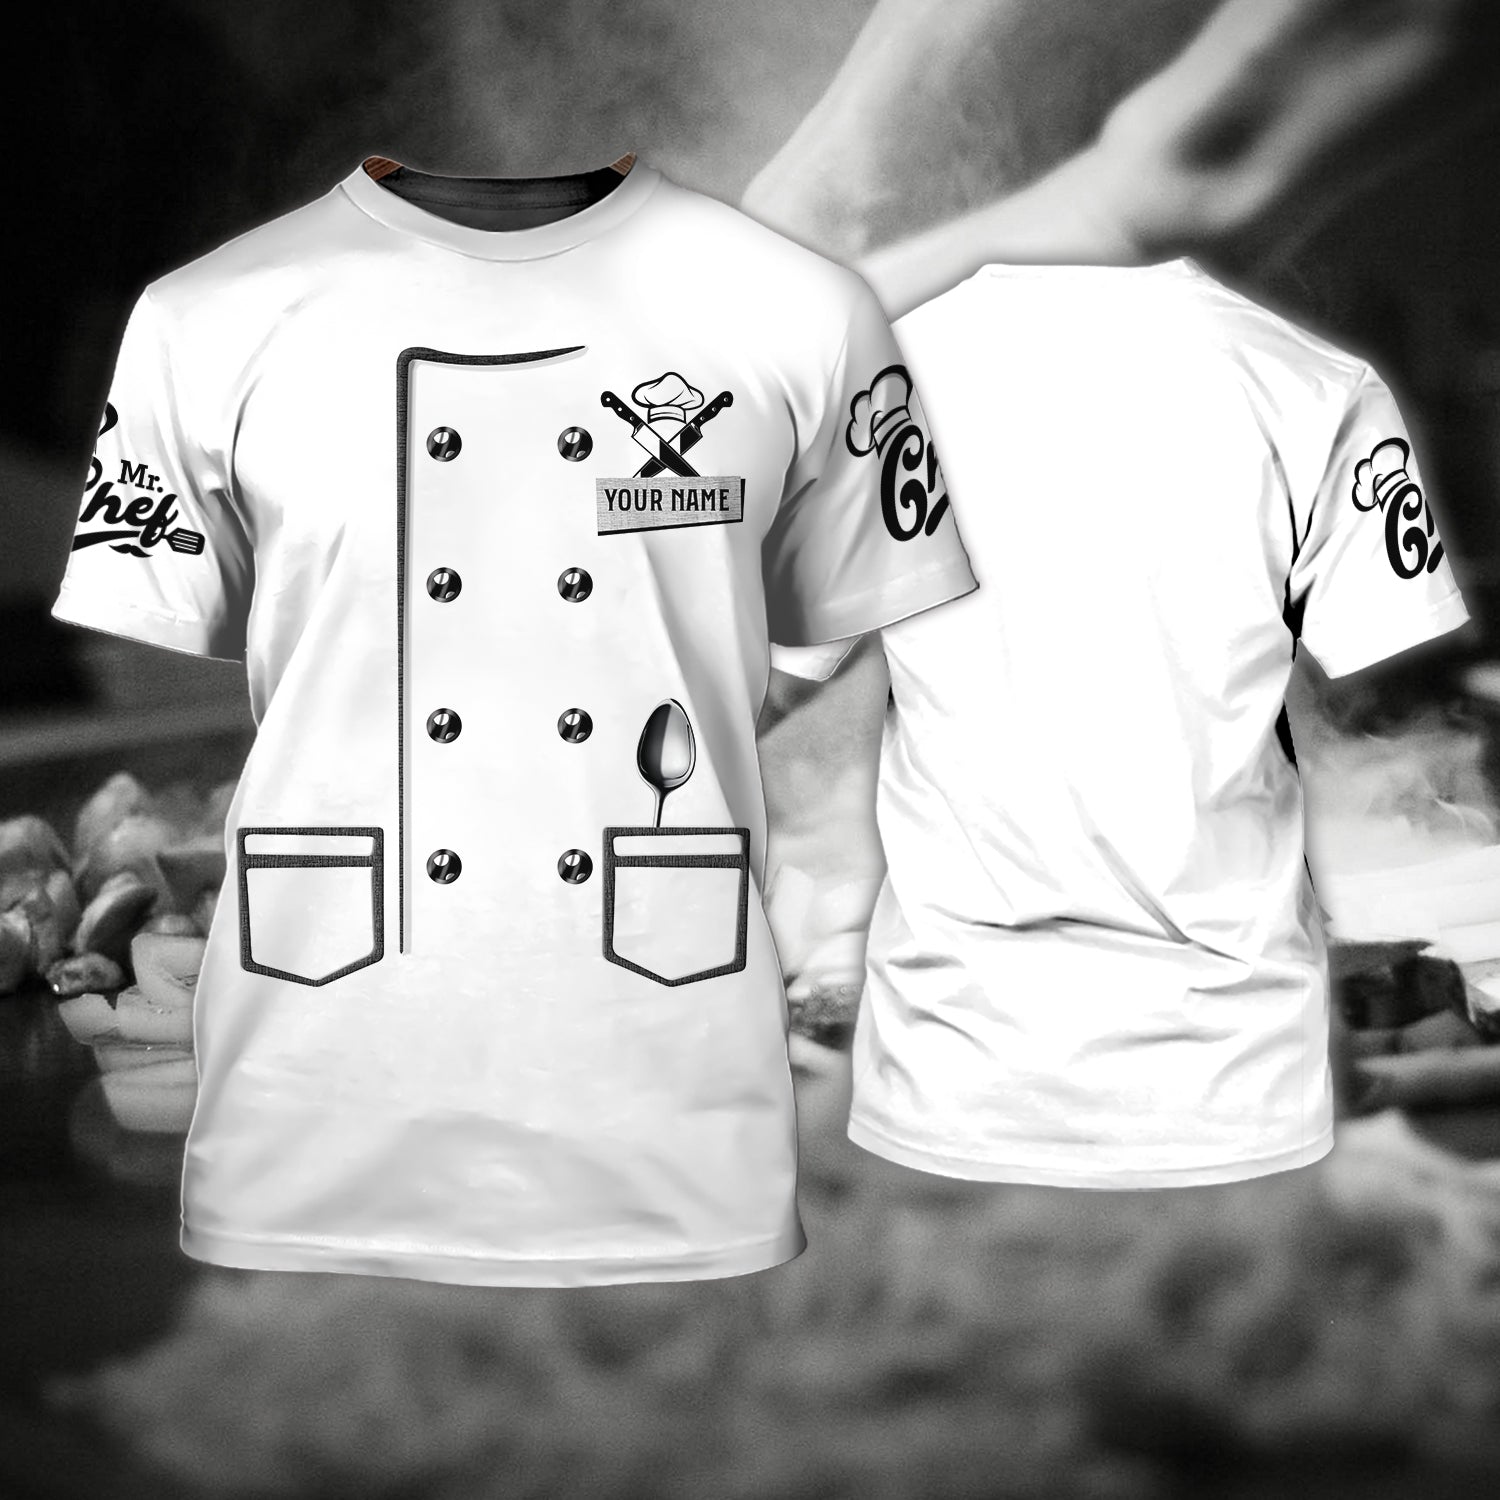 Chef 05 - Personalized Name 3D T Shirt - 16hb